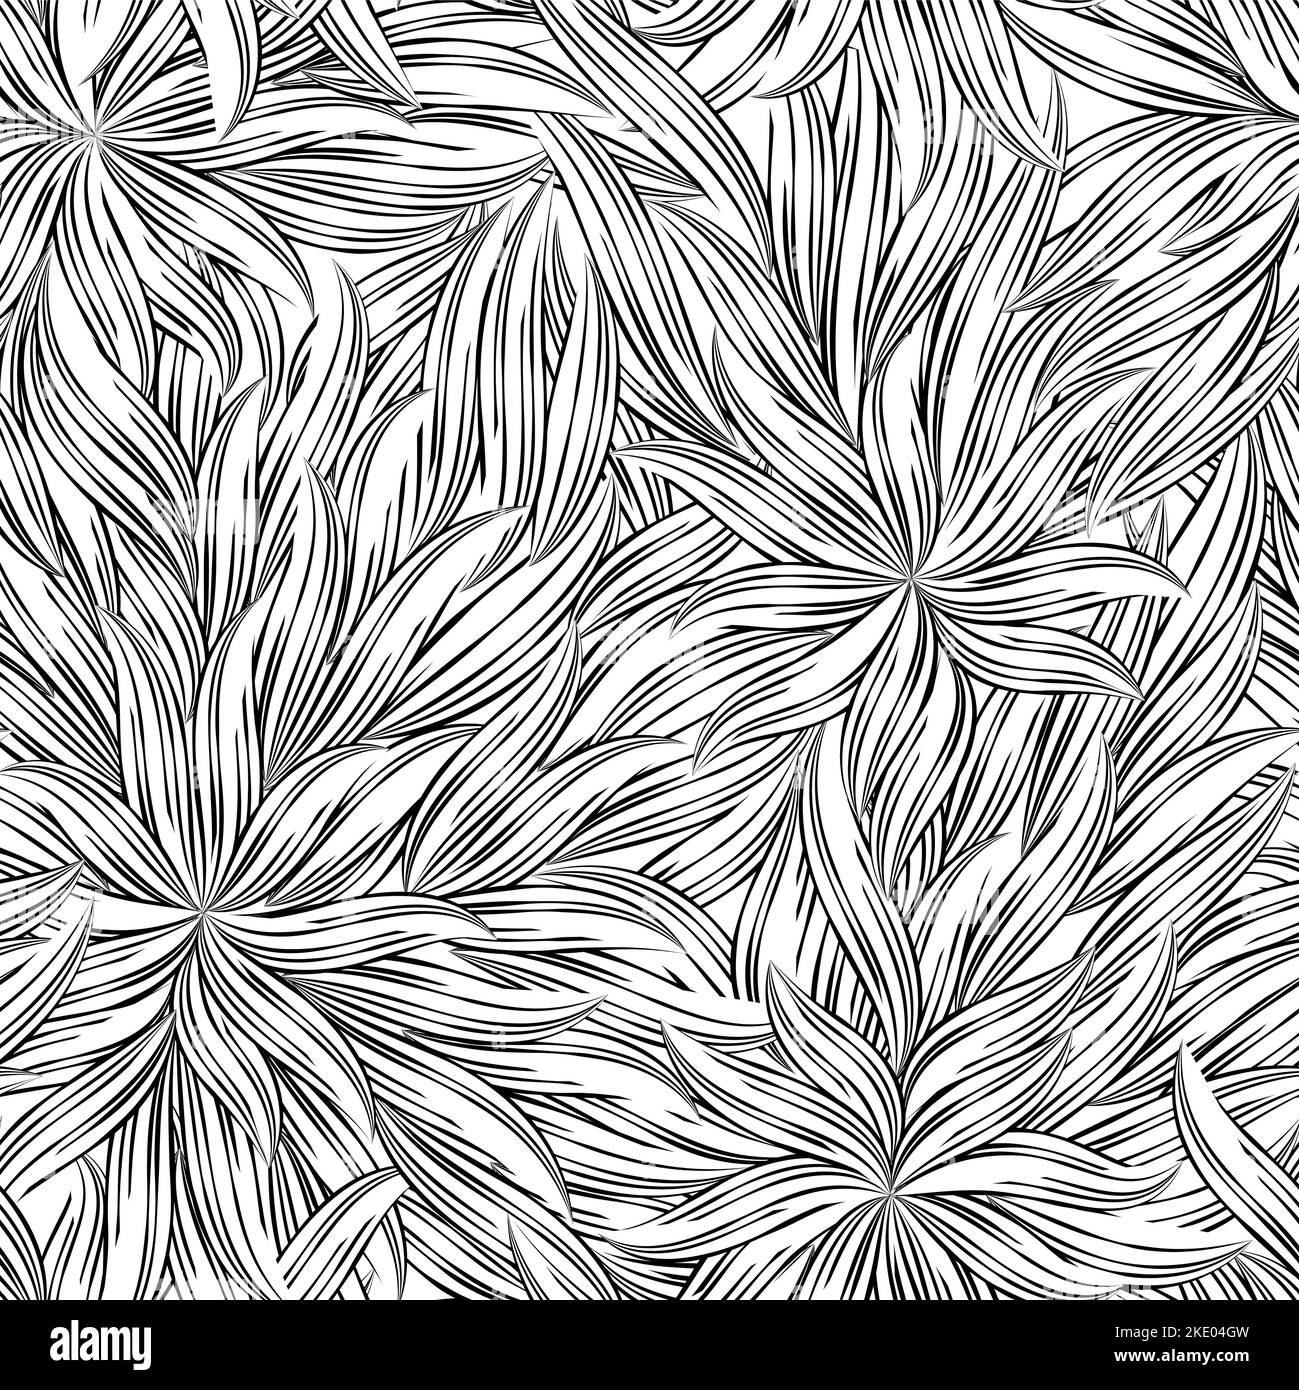 Seamless abstract vector black linear pattern. Seamless vector floral pattern flowers plants or leaves. Stock Vector